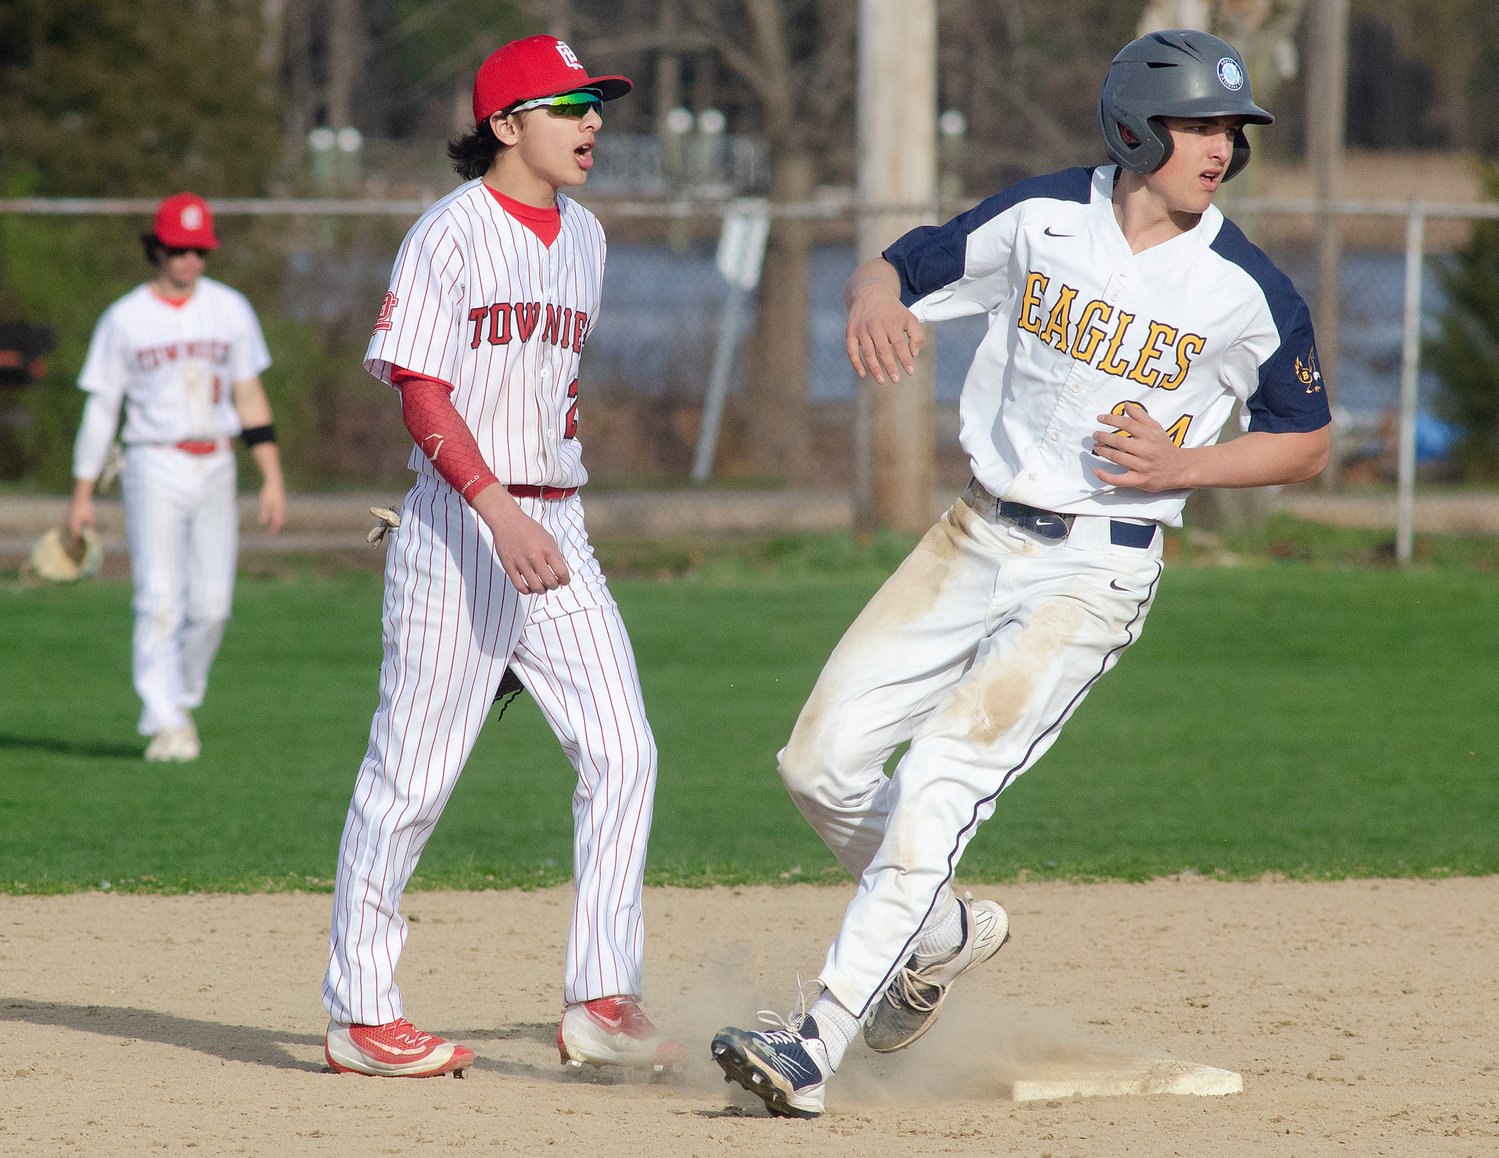 Barrington’s Ned Shapiro rounds second during the Eagles’ 5-2 win over East Providence on Wednesday, April 13.